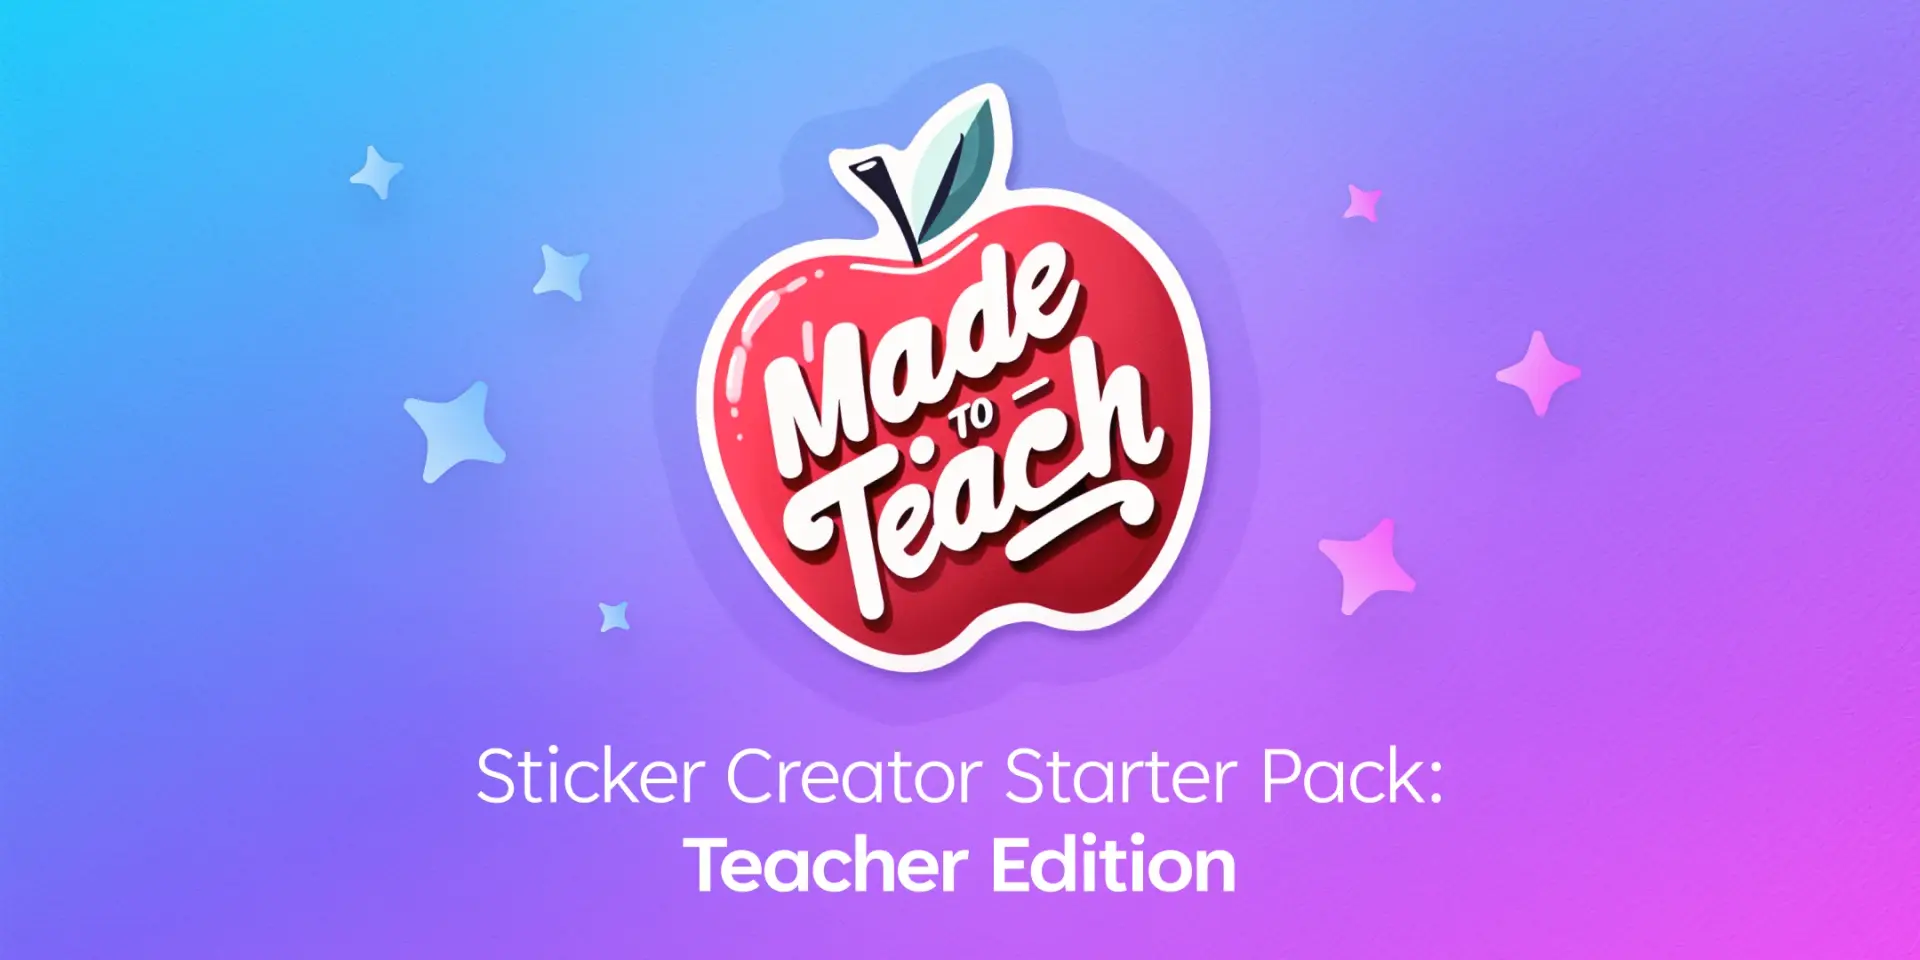 An apple sticker that says "Made to Teach" on a purple gradient background